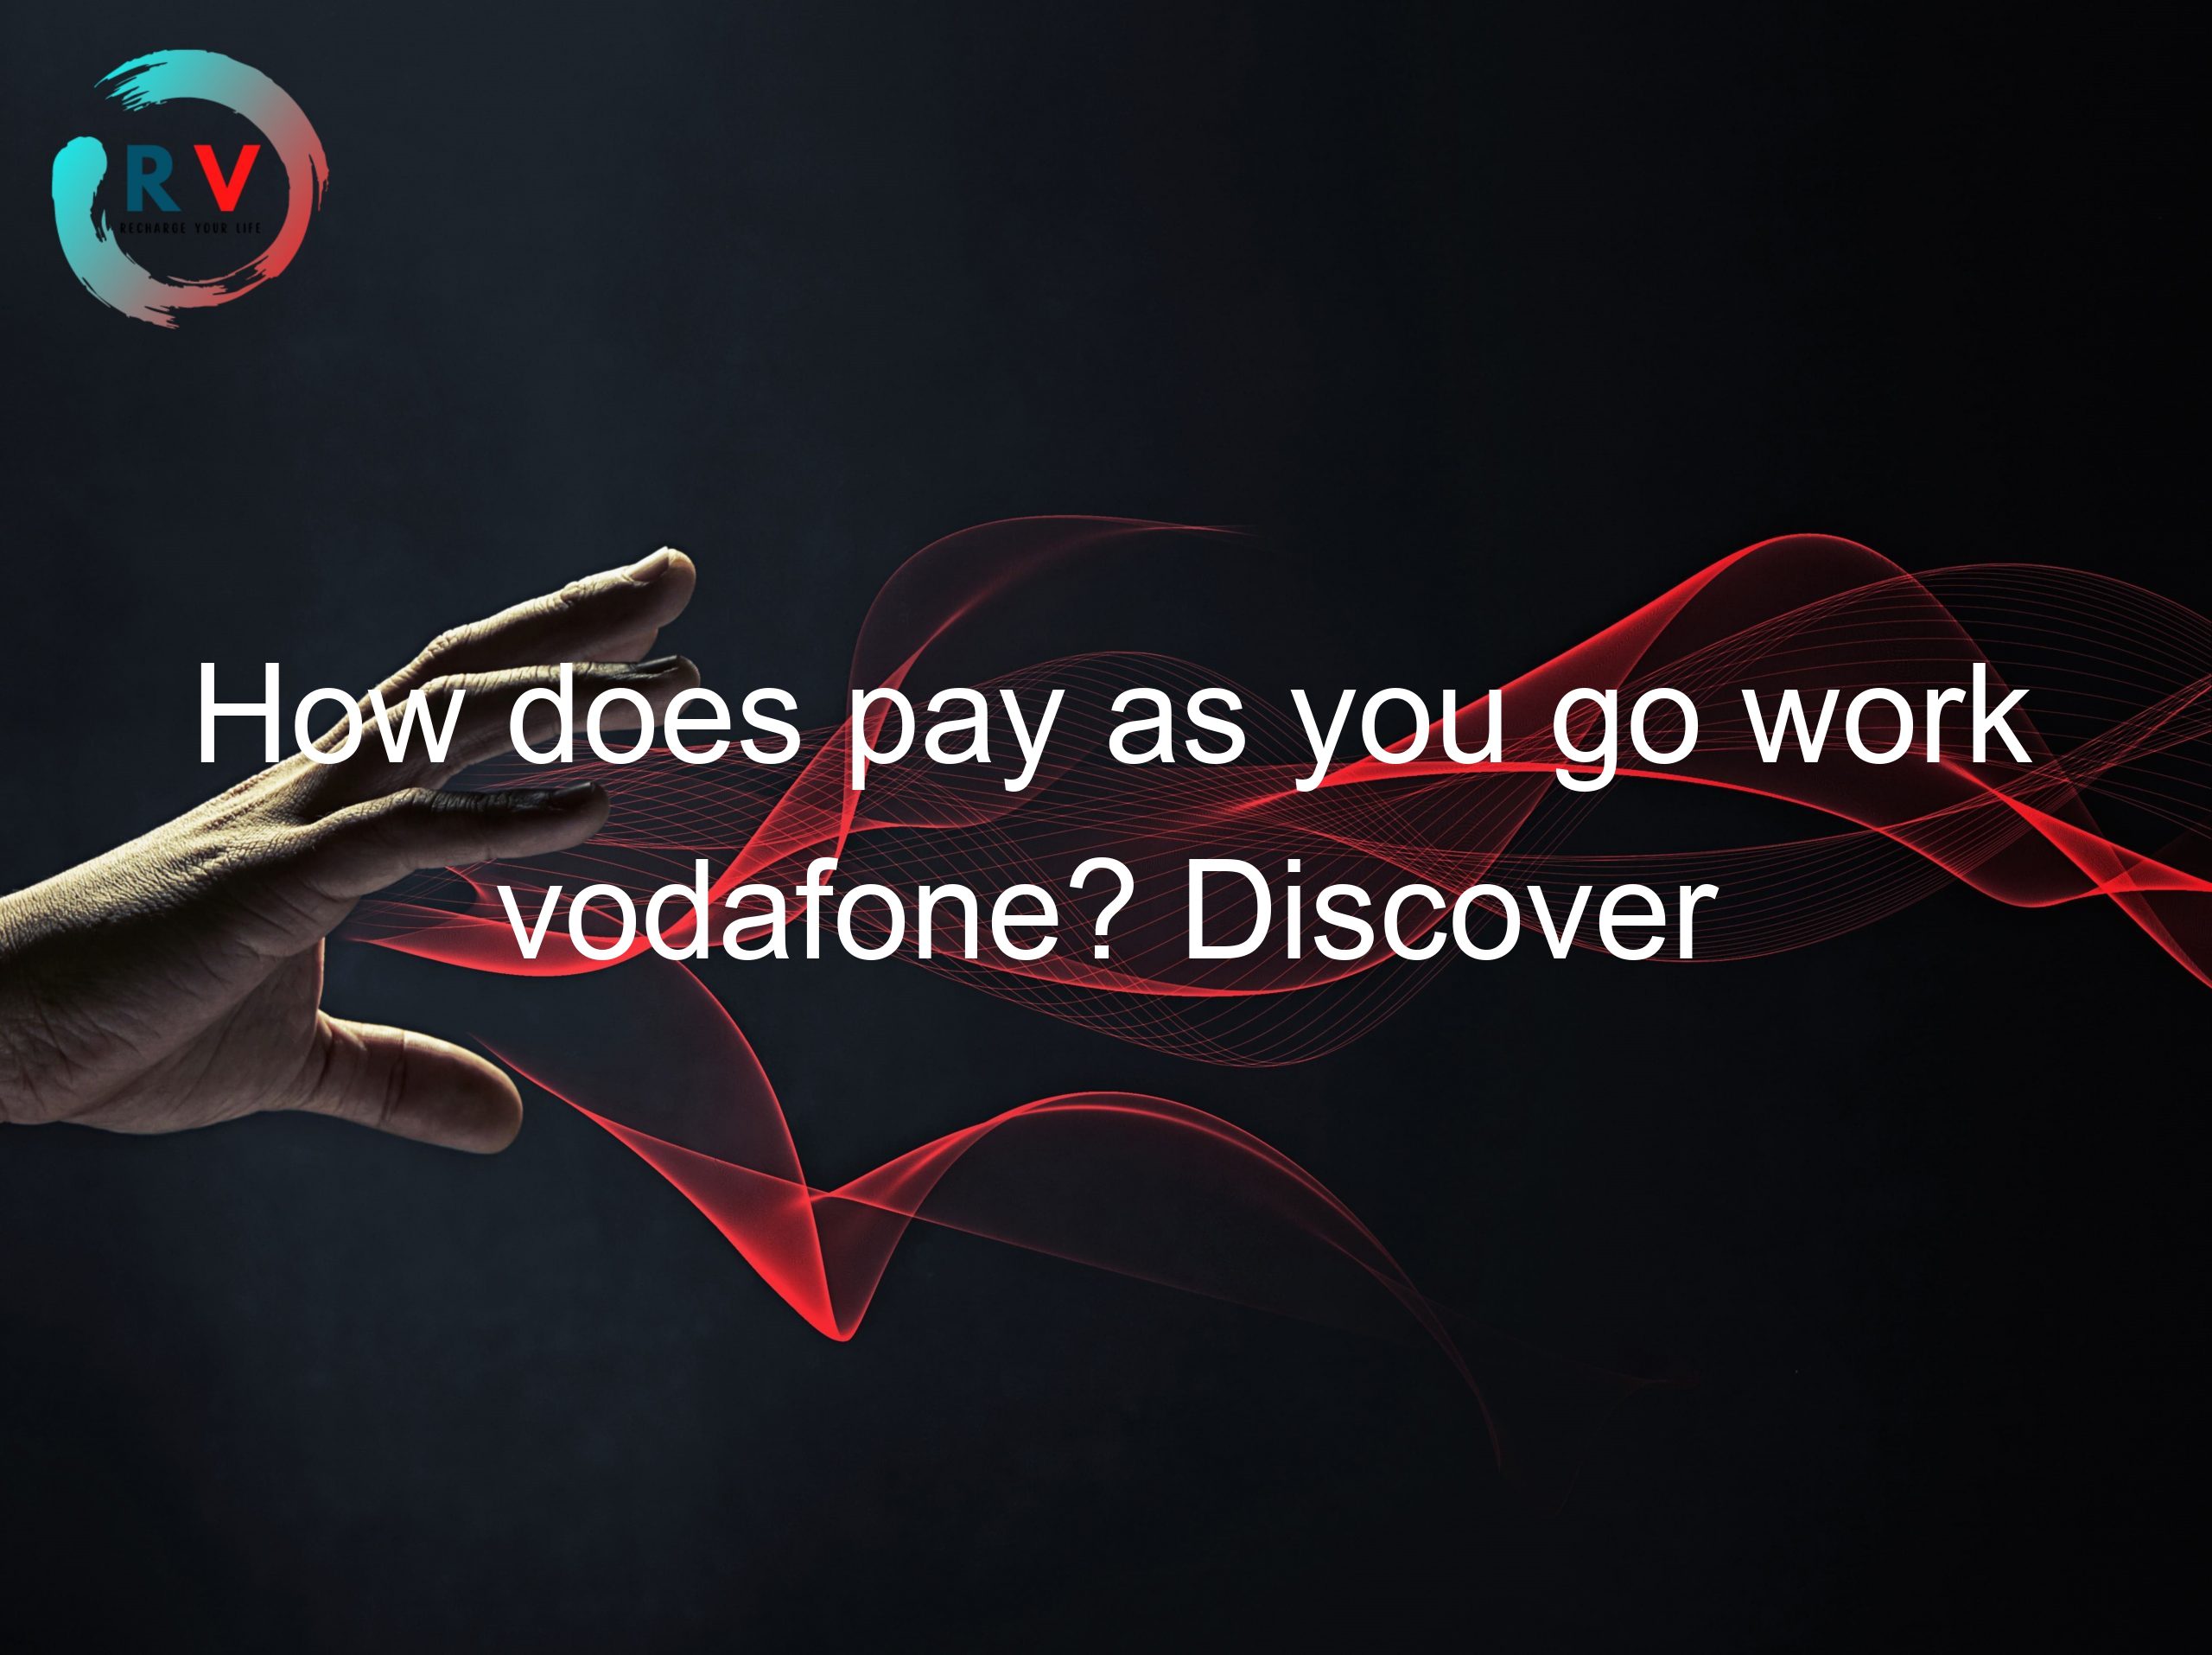 How does pay as you go work vodafone? Discover the answer in this article